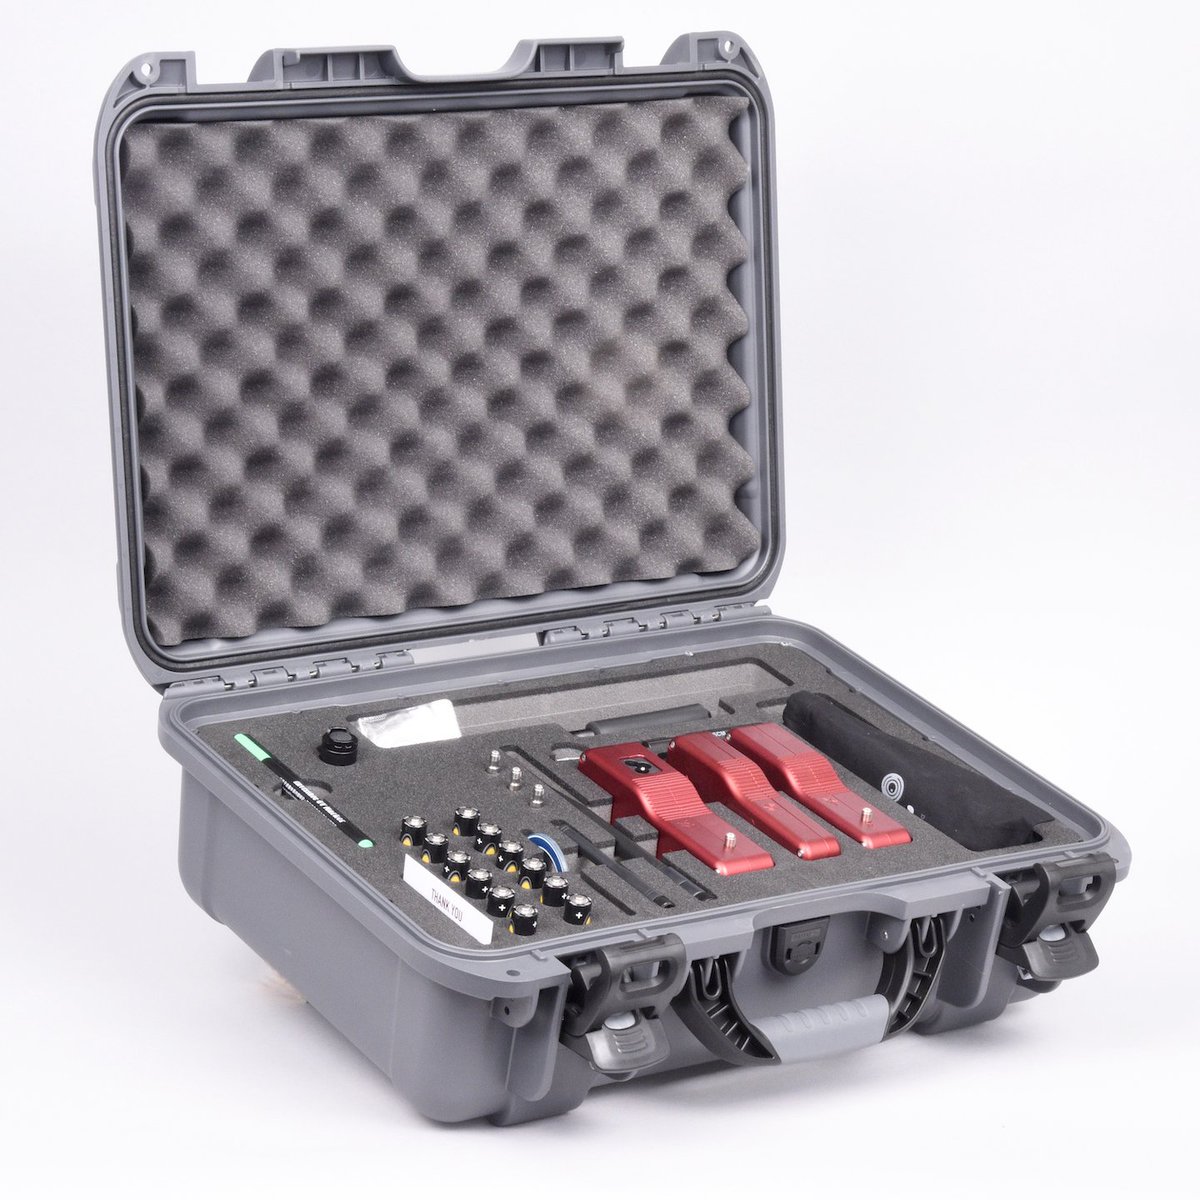 SOLUTION ALERT: Need A TSCM Kit That's State-of-the-Art and Minimizes Training Time? Check Out the Lockhart TSCM Kit: tinyurl.com/tdrx34wf #TSCM #security #ExecutiveProtection #corporatesecurity #securitymanagement